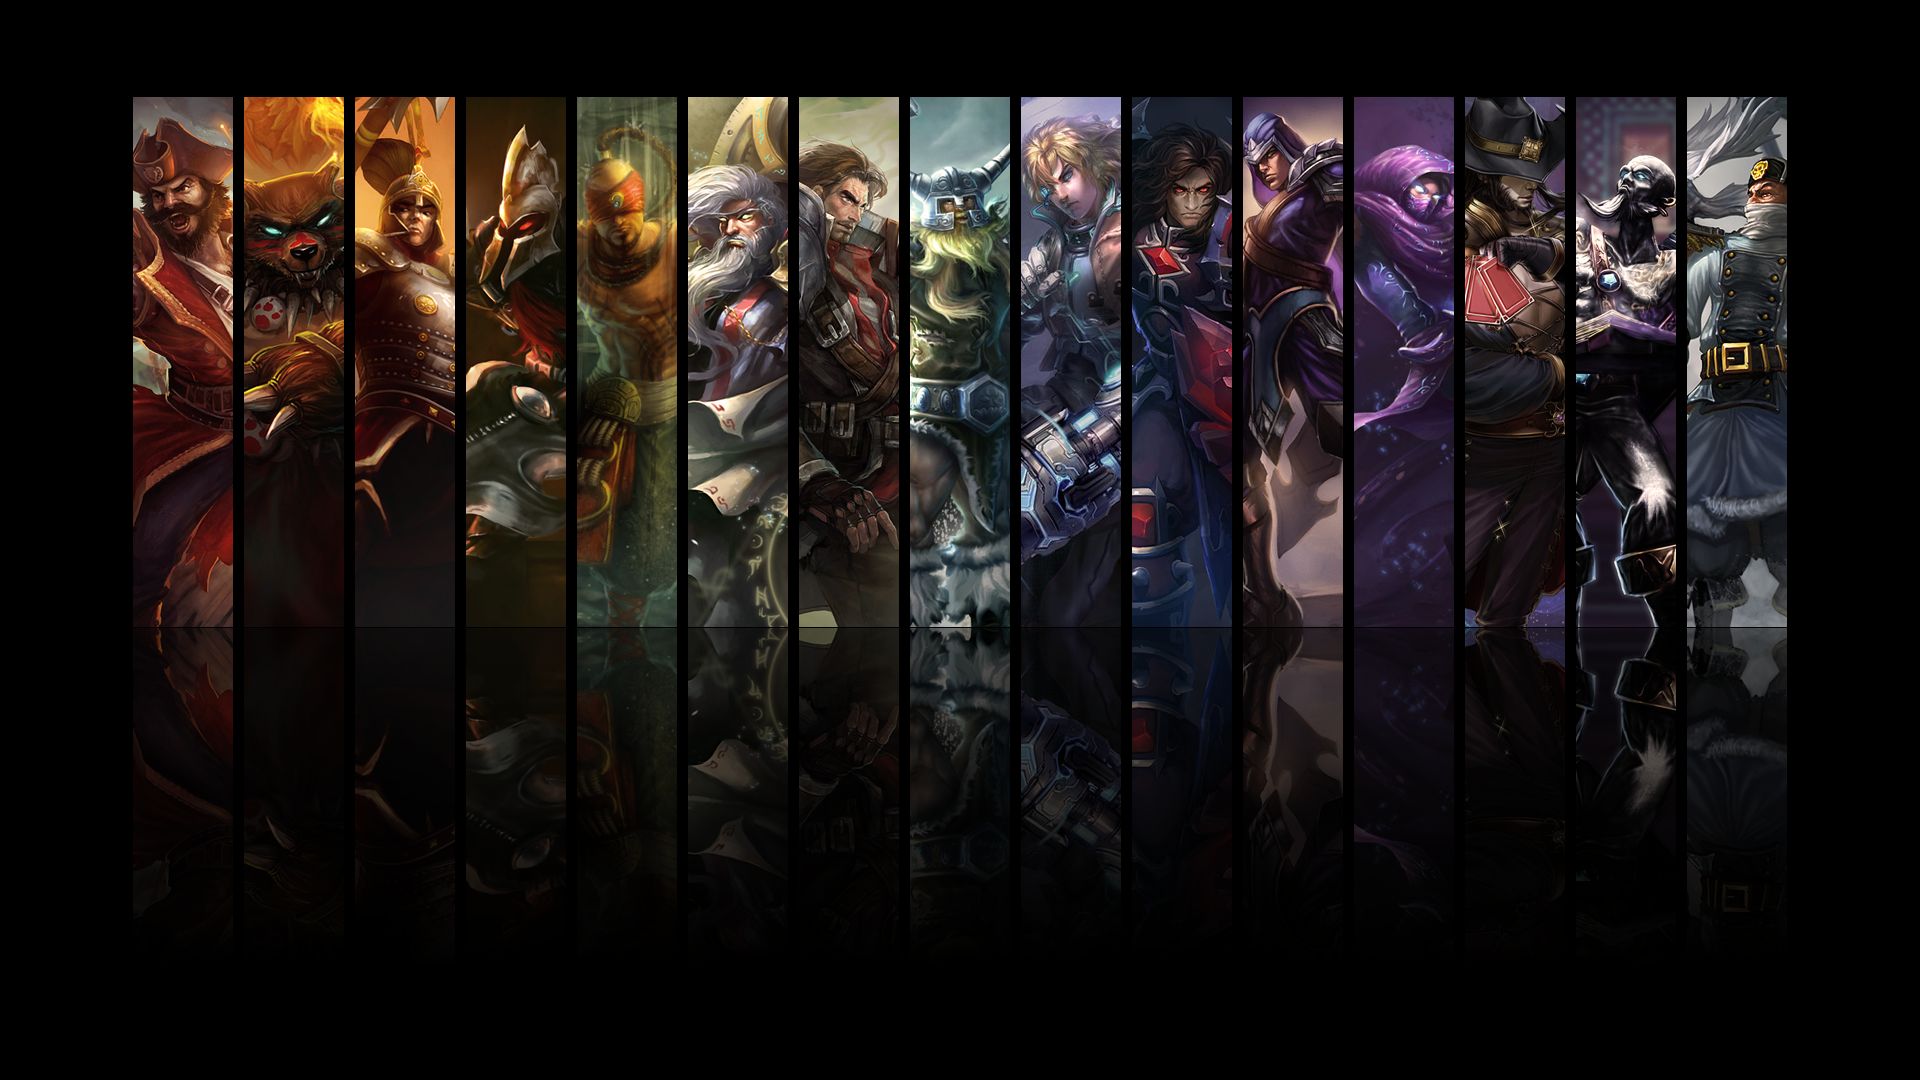 android video game, league of legends, ezreal (league of legends), gangplank (league of legends), garen (league of legends), lee sin (league of legends), malzahar (league of legends), olaf (league of legends), pantheon (league of legends), ryze (league of legends), swain (league of legends), taric (league of legends), twisted fate (league of legends), udyr (league of legends), zilean (league of legends)